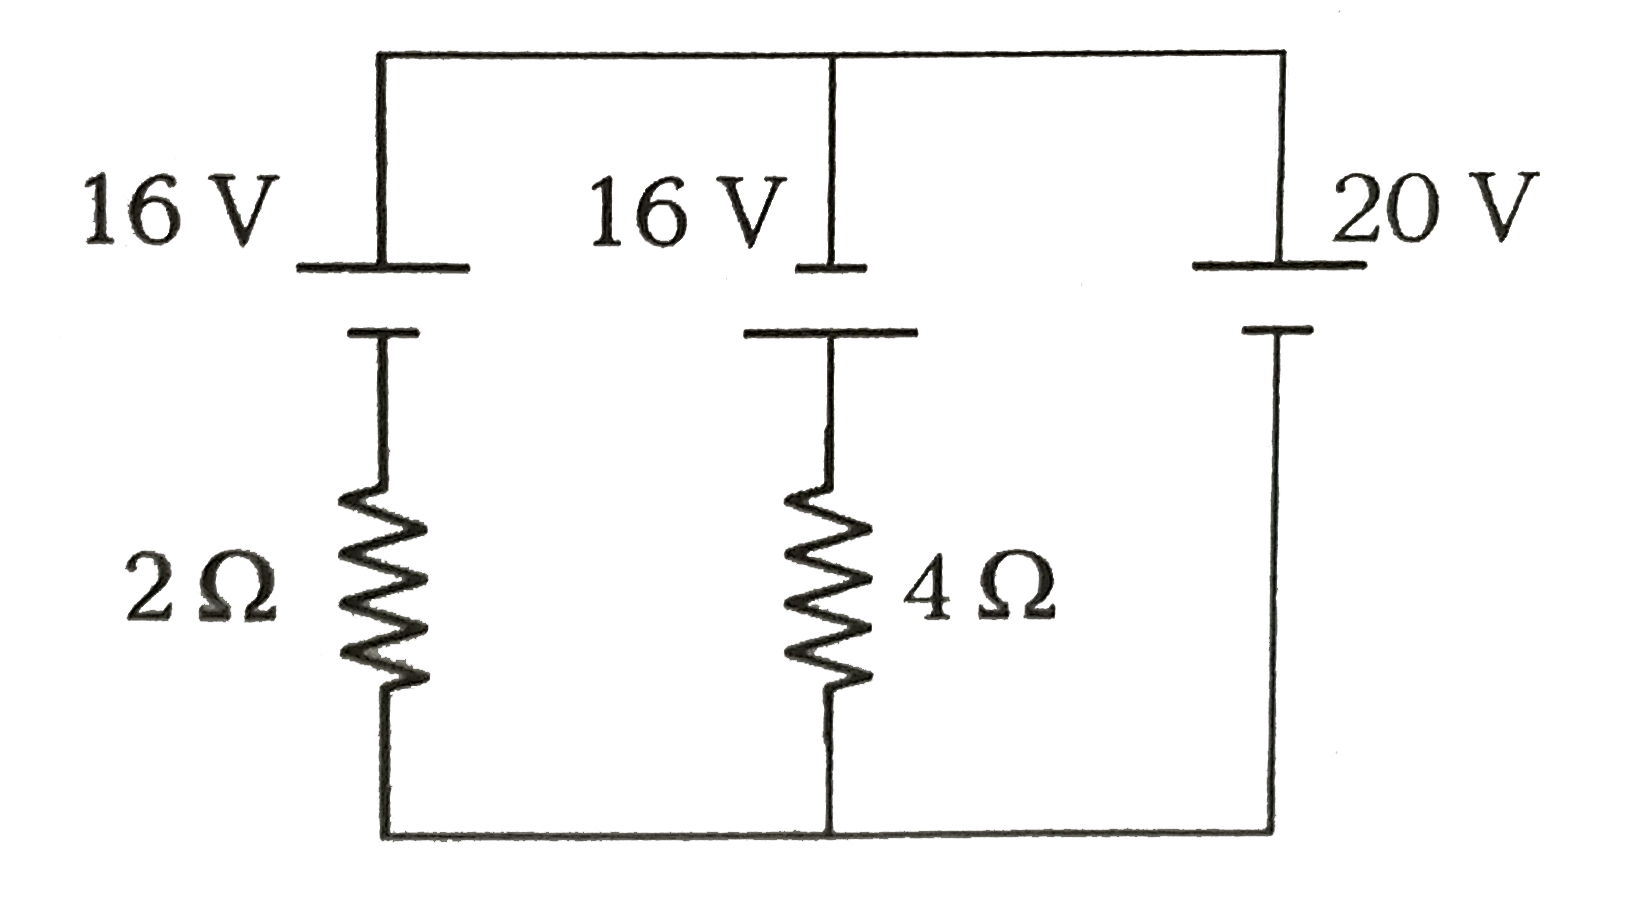 In the given figure, the current through the 20 V battery is